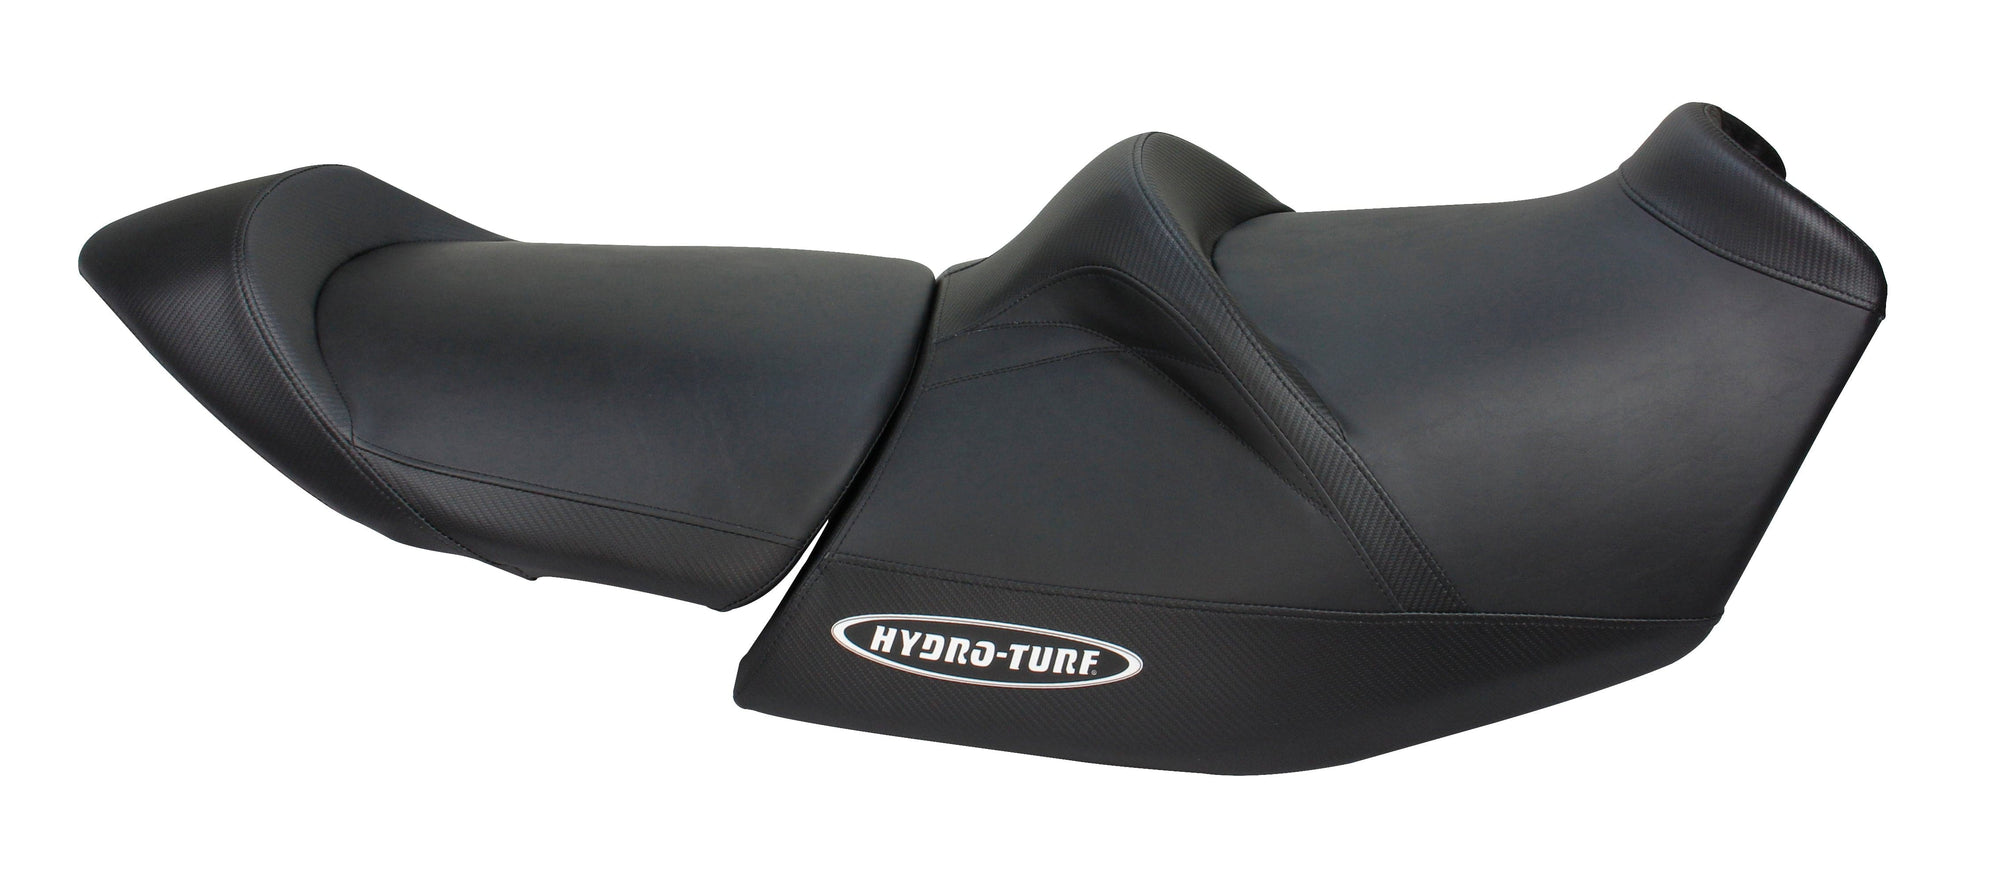 Hydro-Turf seat cover for RXT 230, RXT-X 300 Wake Pro 230 (18) Colorway A